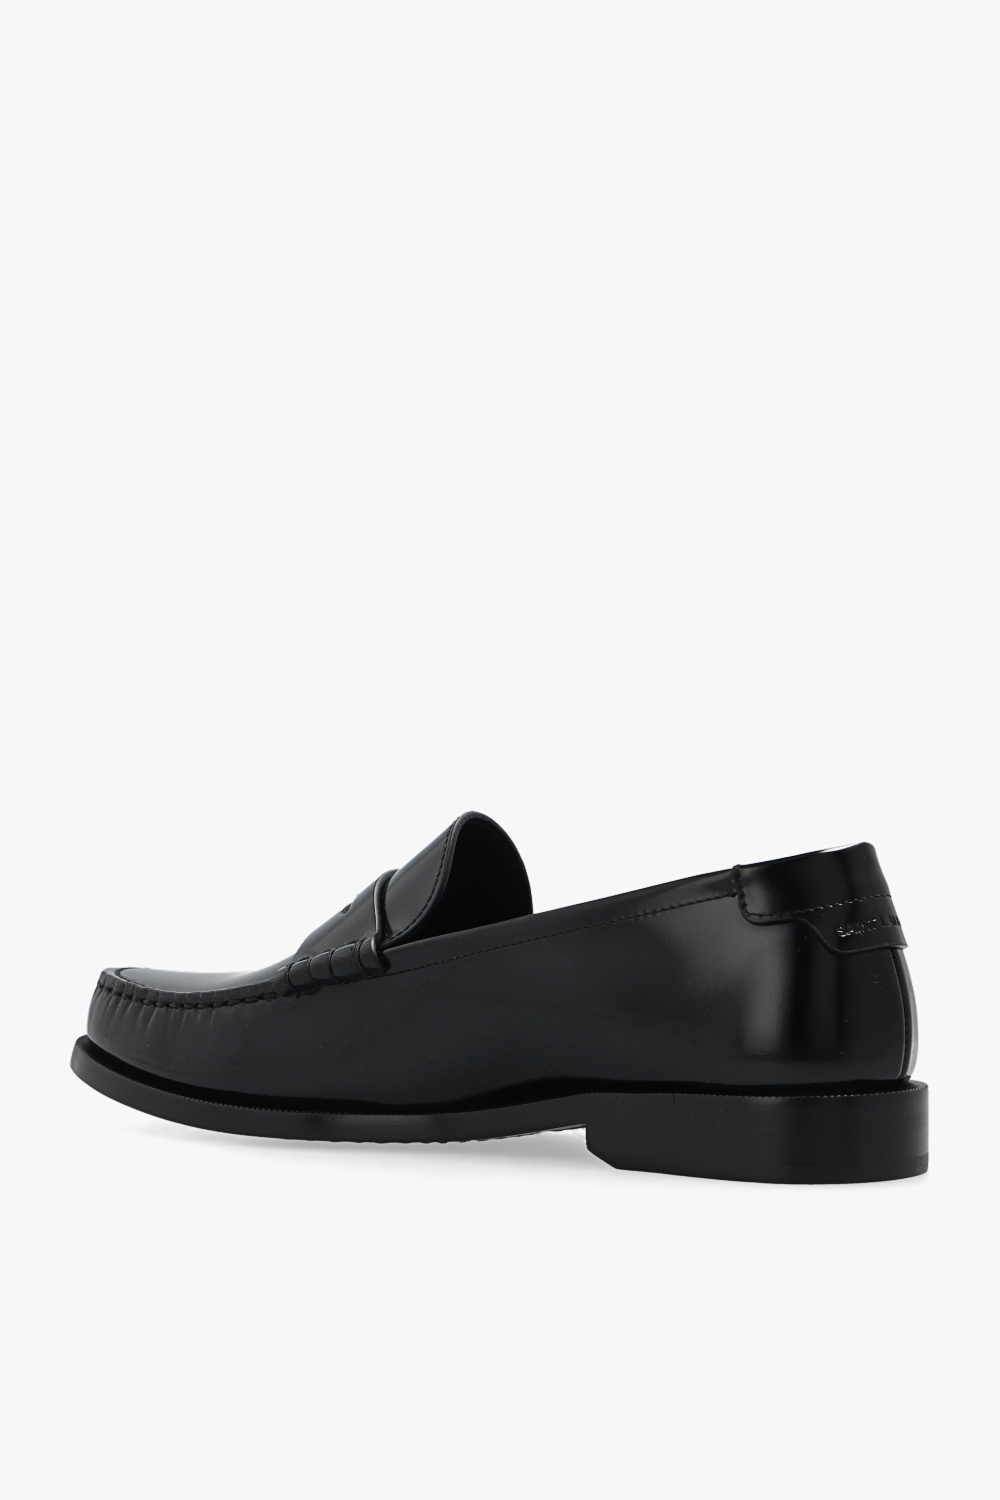 Saint Laurent Leather penny loafers